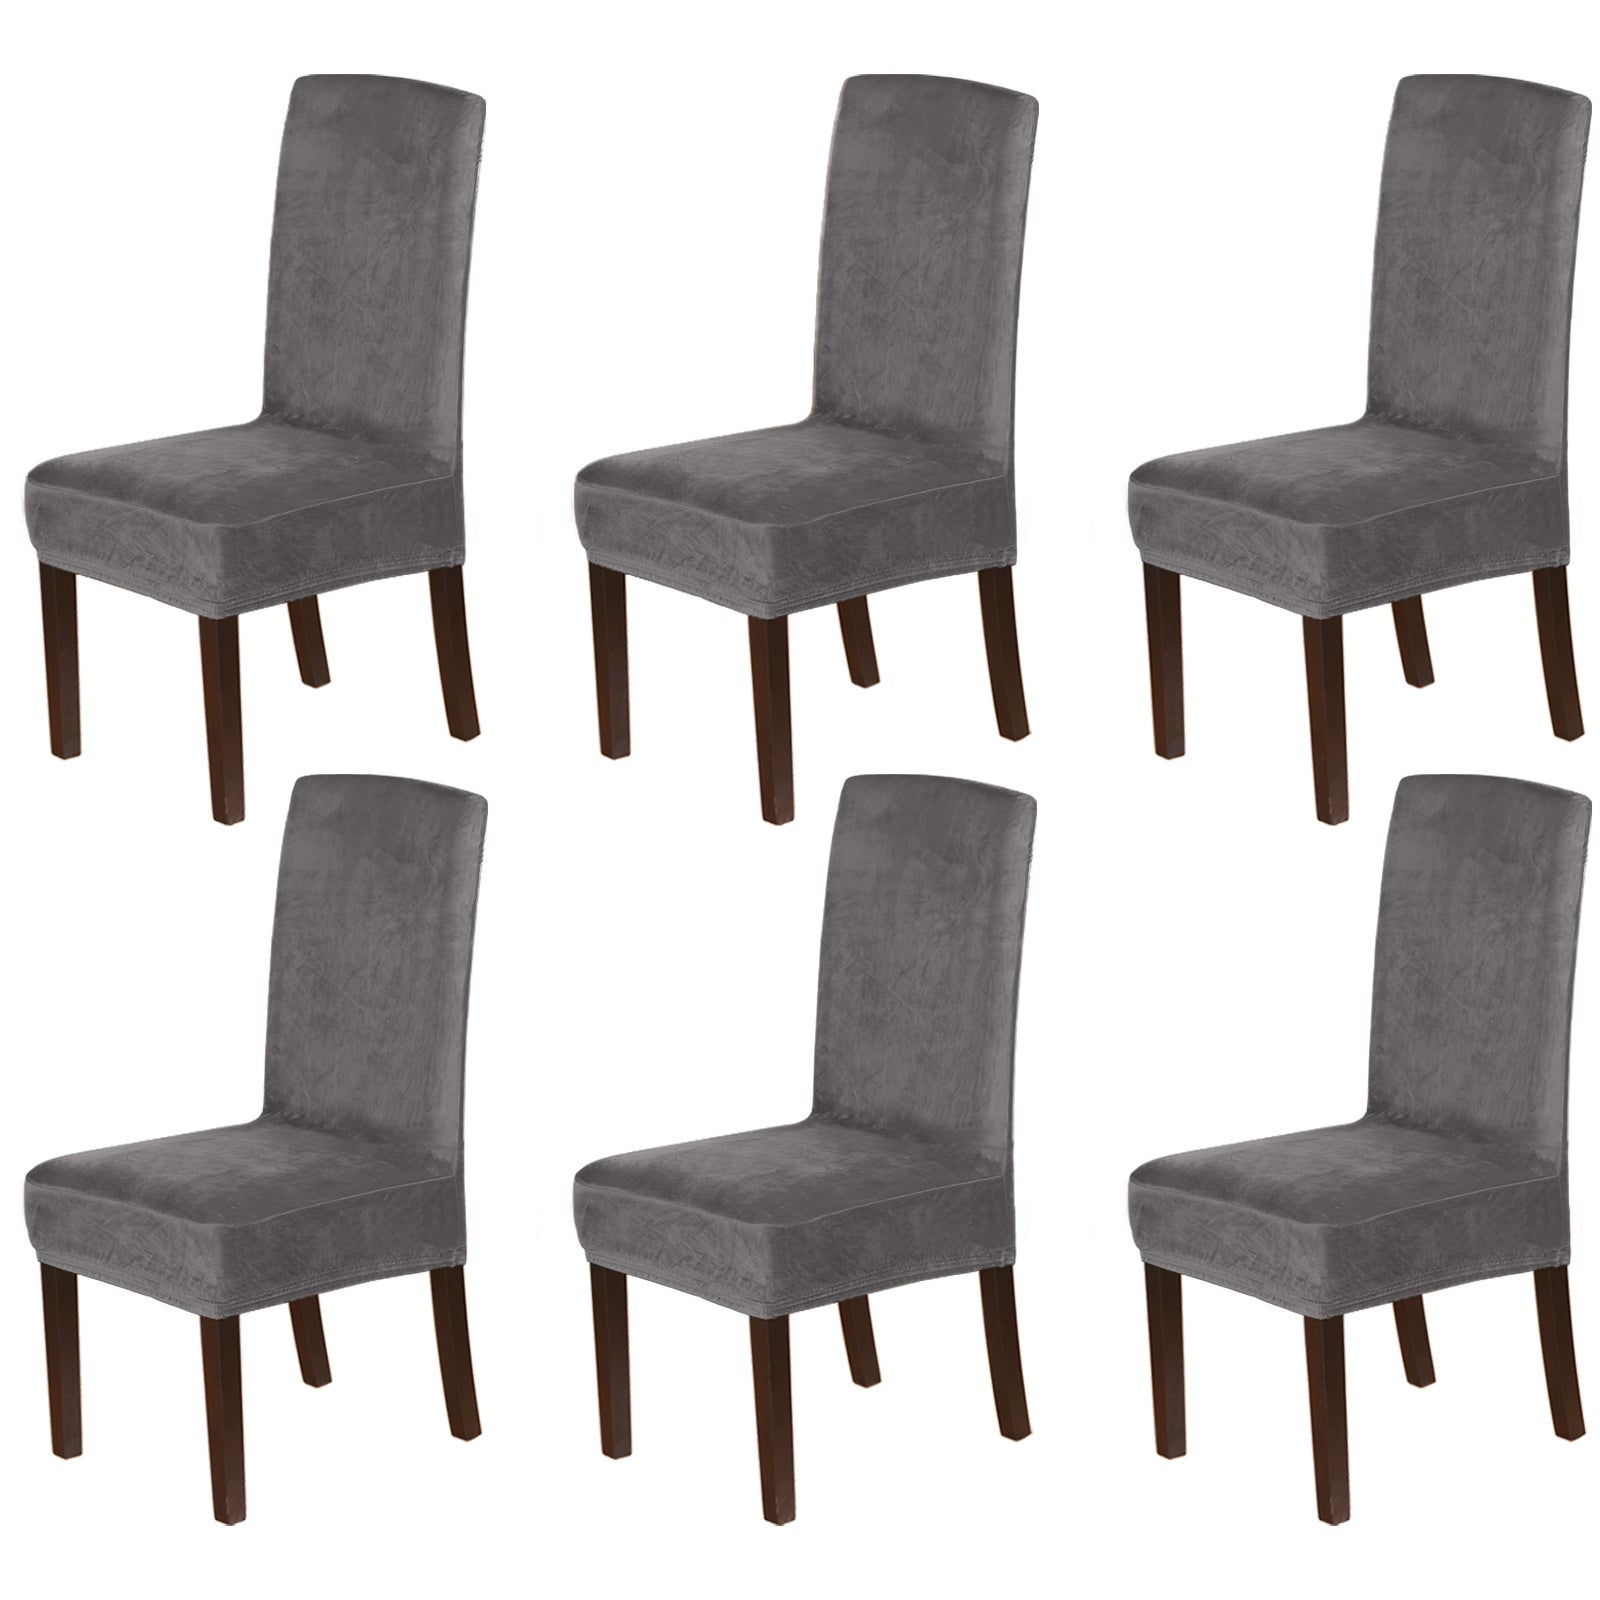 Thick Velvet Dining Chair Covers Slip Covers Dining Room Chairs Cover 2/4/6 Pack